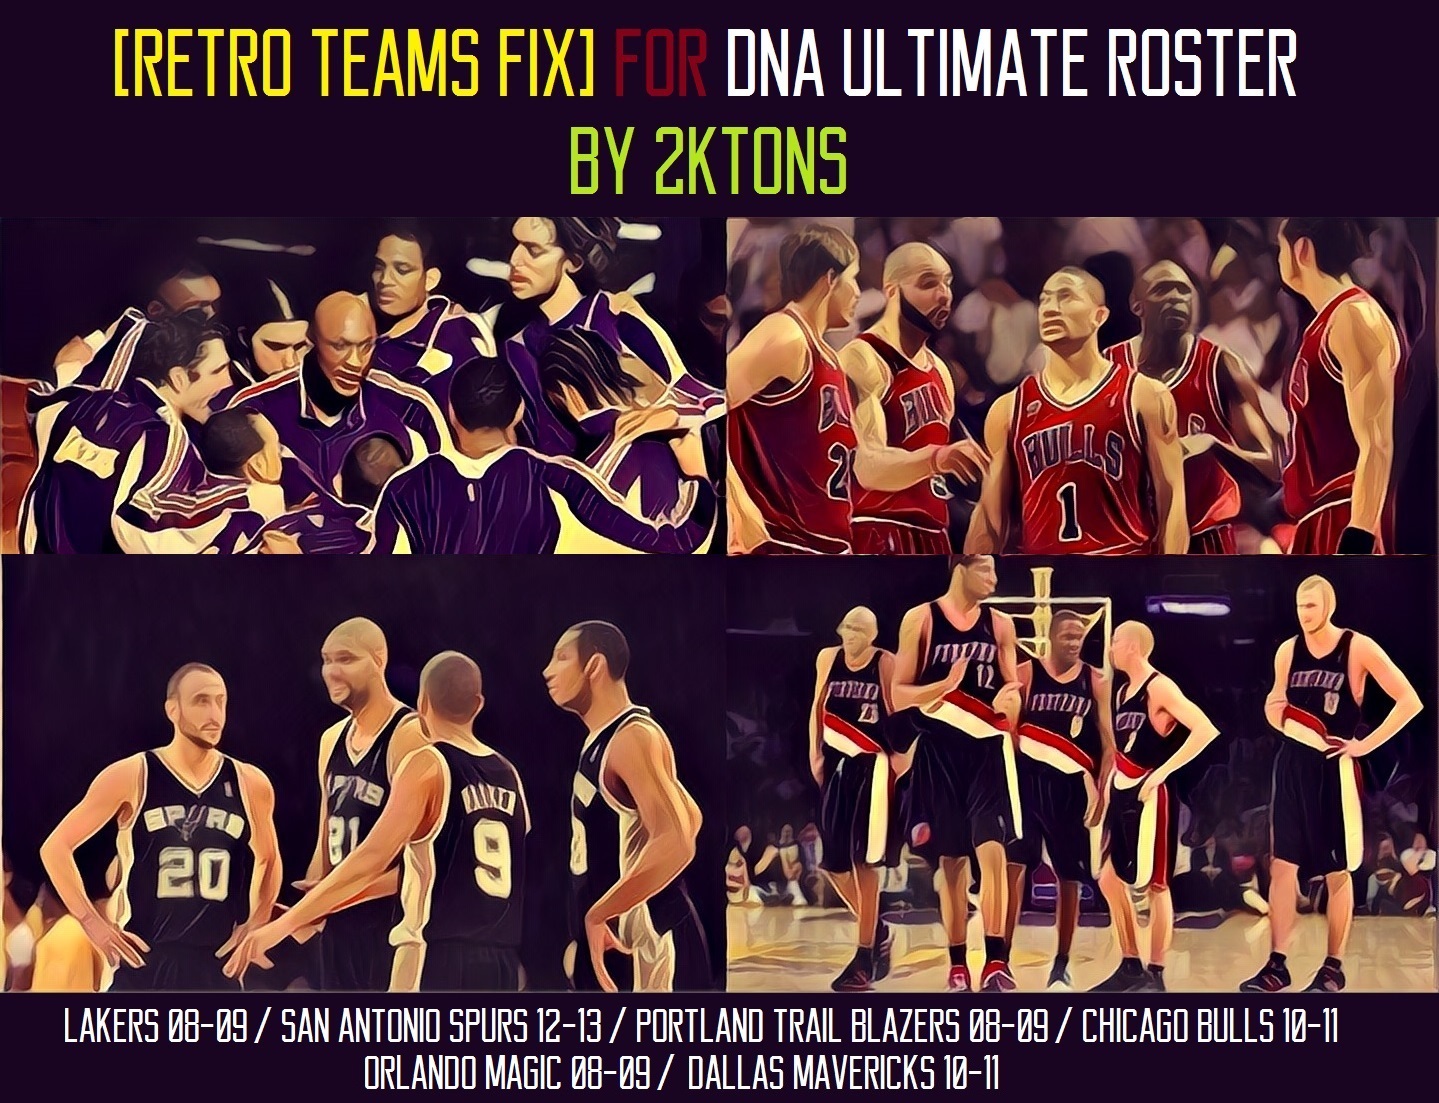 NBA 2K17 DNA Ultimate Roster [RETRO TEAMS FIX] by 2KTons